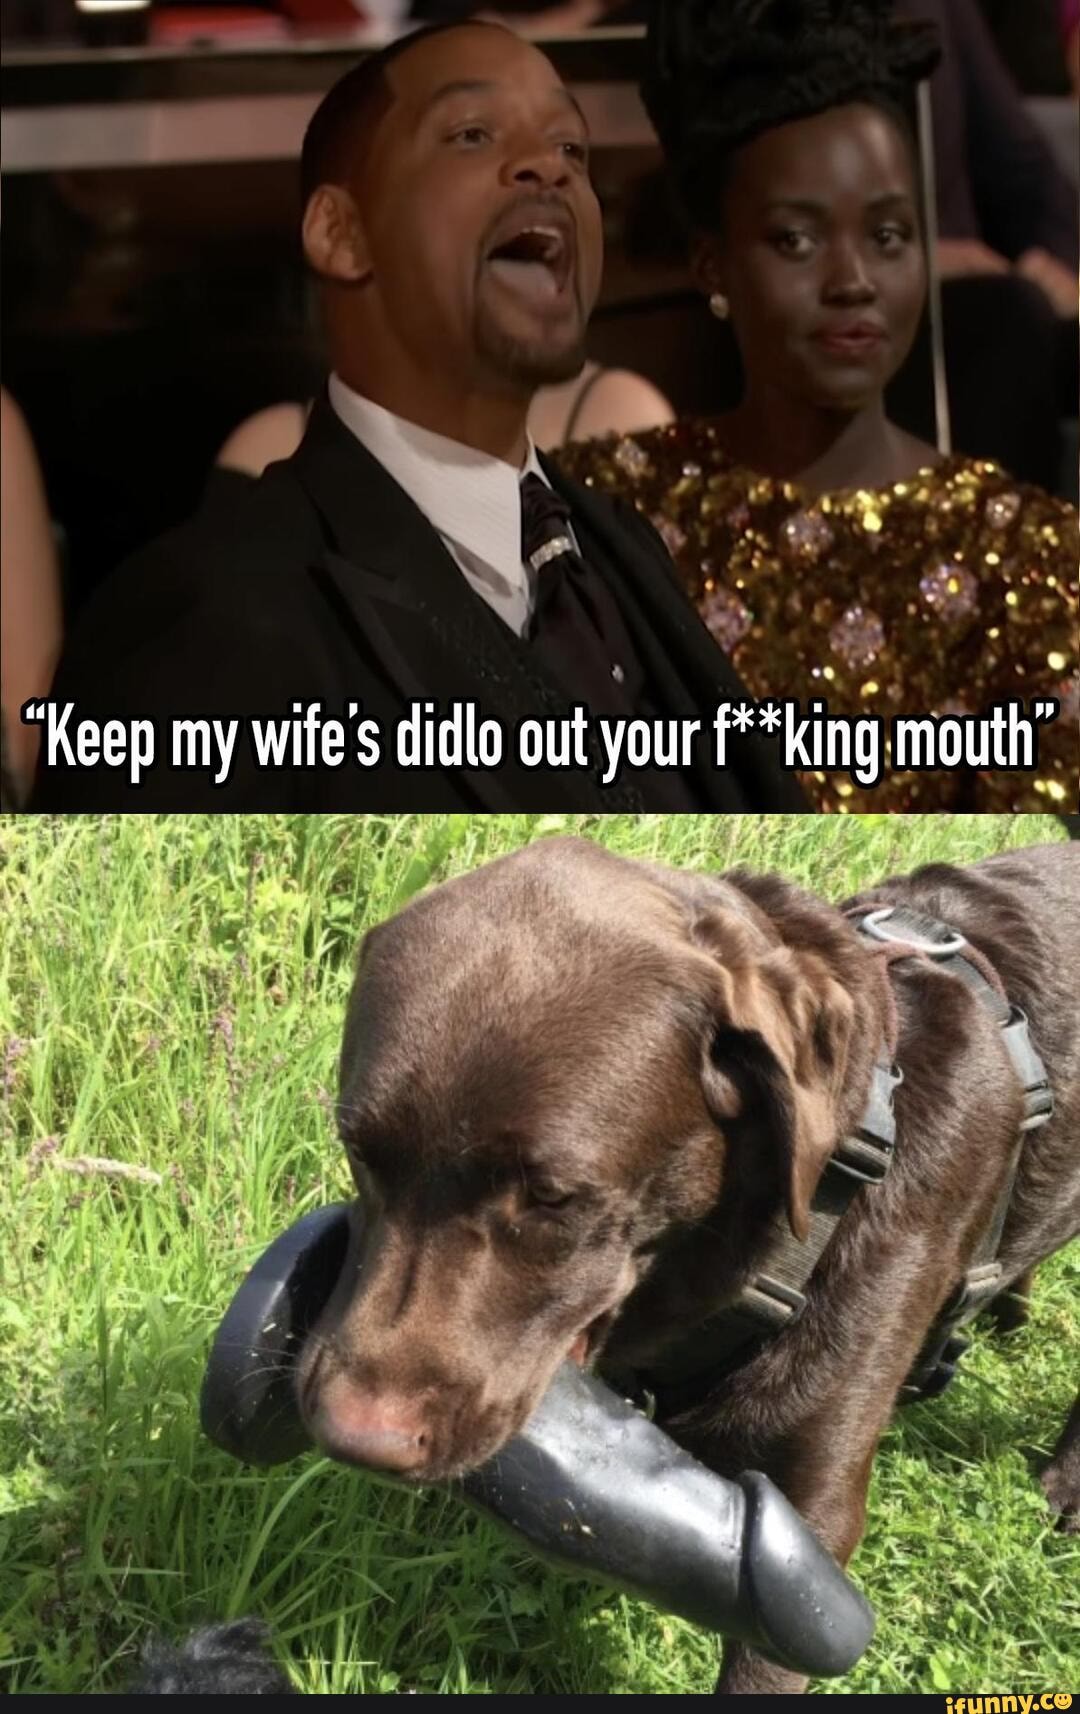 "Keep my wifes didlo out your "king mouth" picture